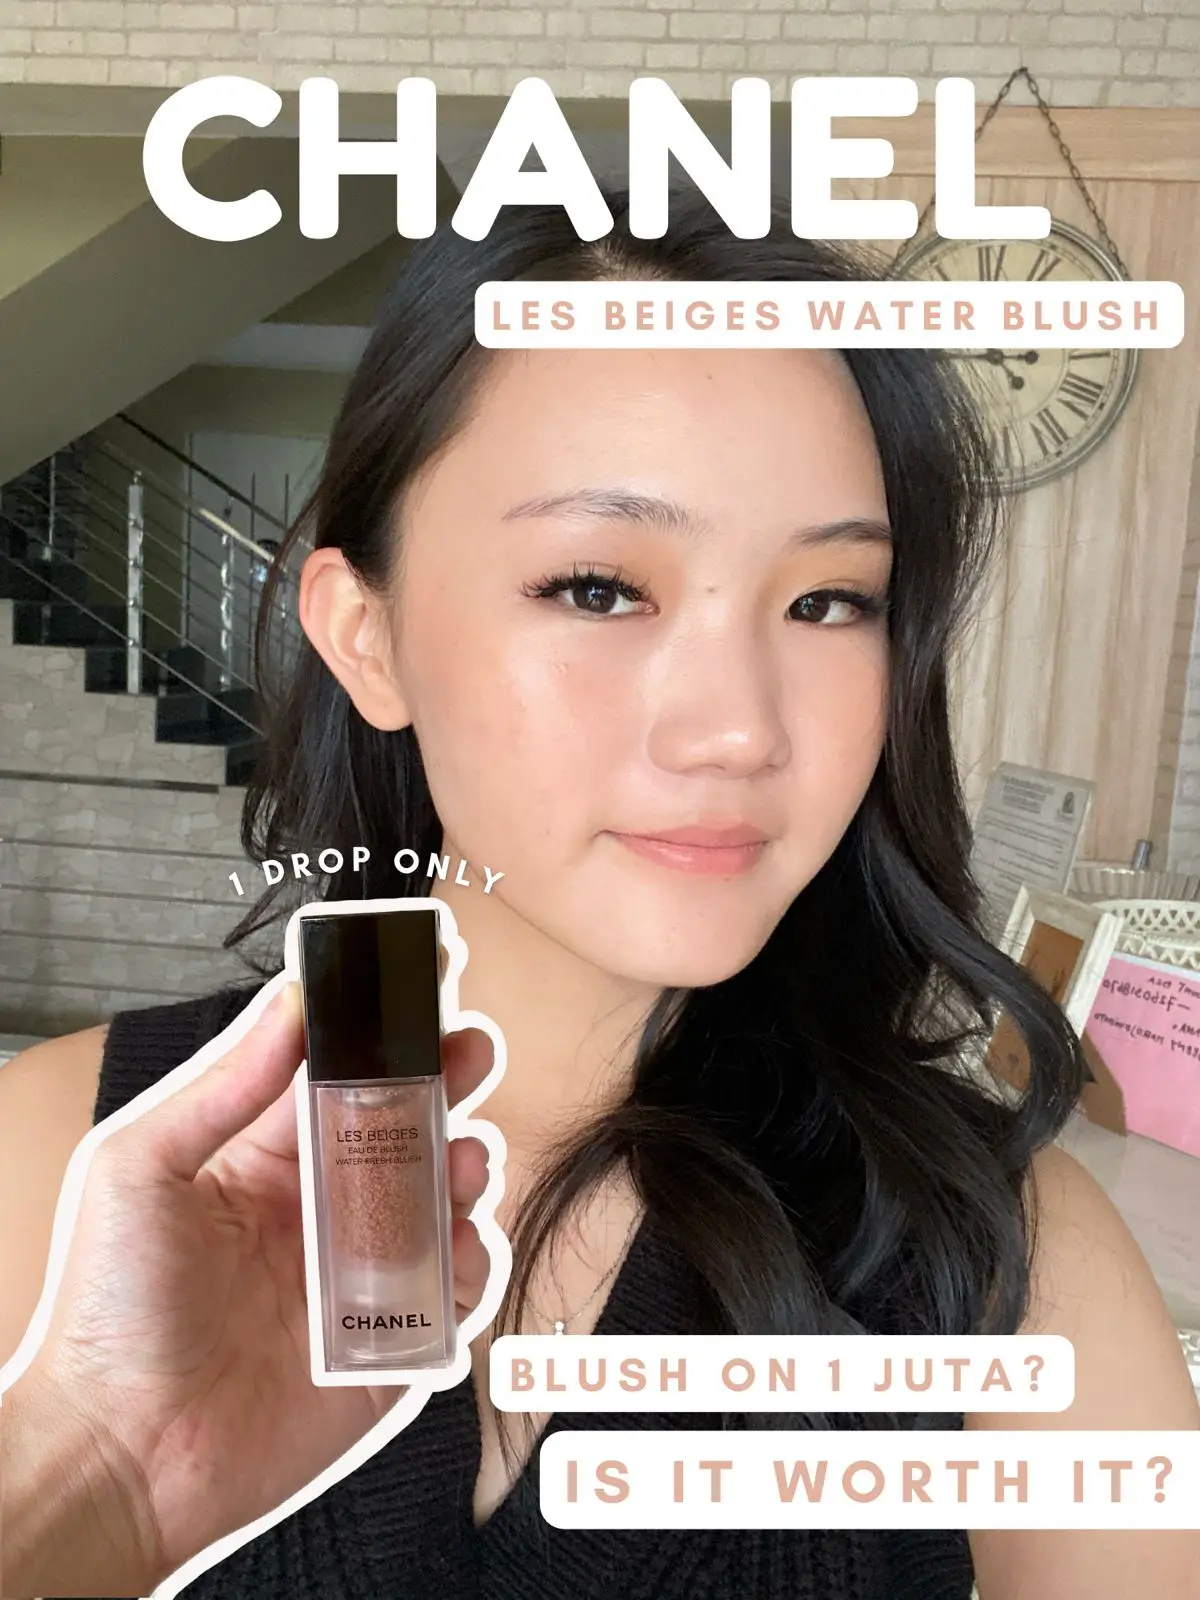 Chanel blush that worth 1 million review! 💗